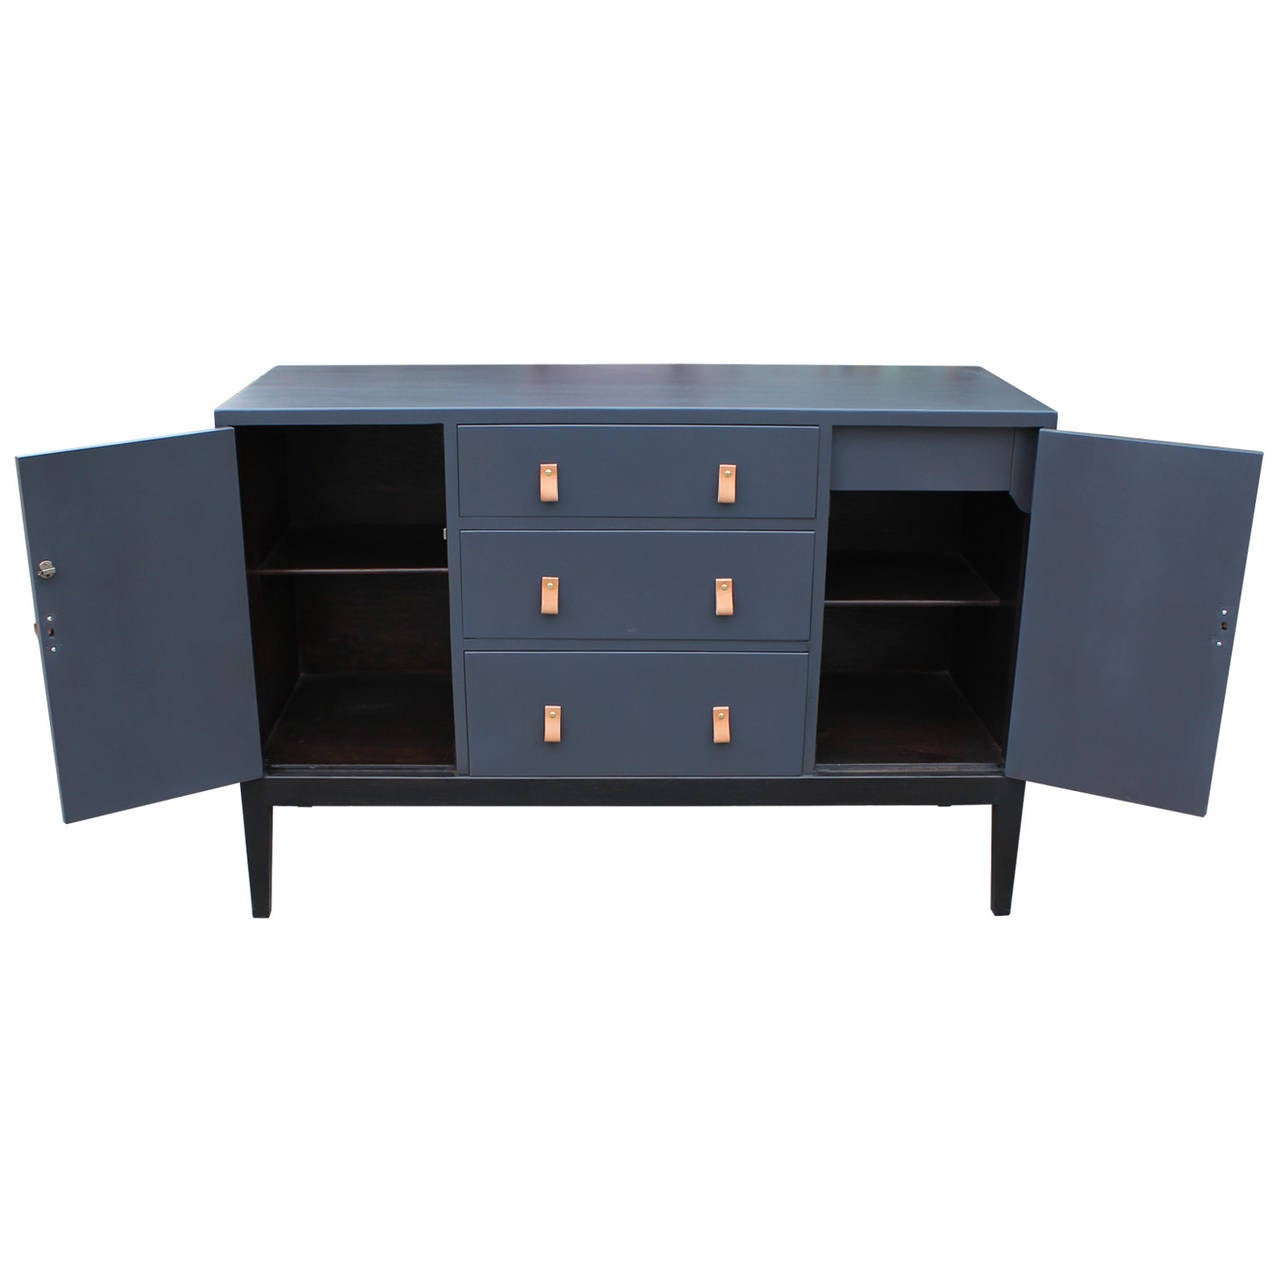 Grey stained sideboard or buffet with custom cut leather handles. Buffet is made of mahogany. In excellent restored condition.